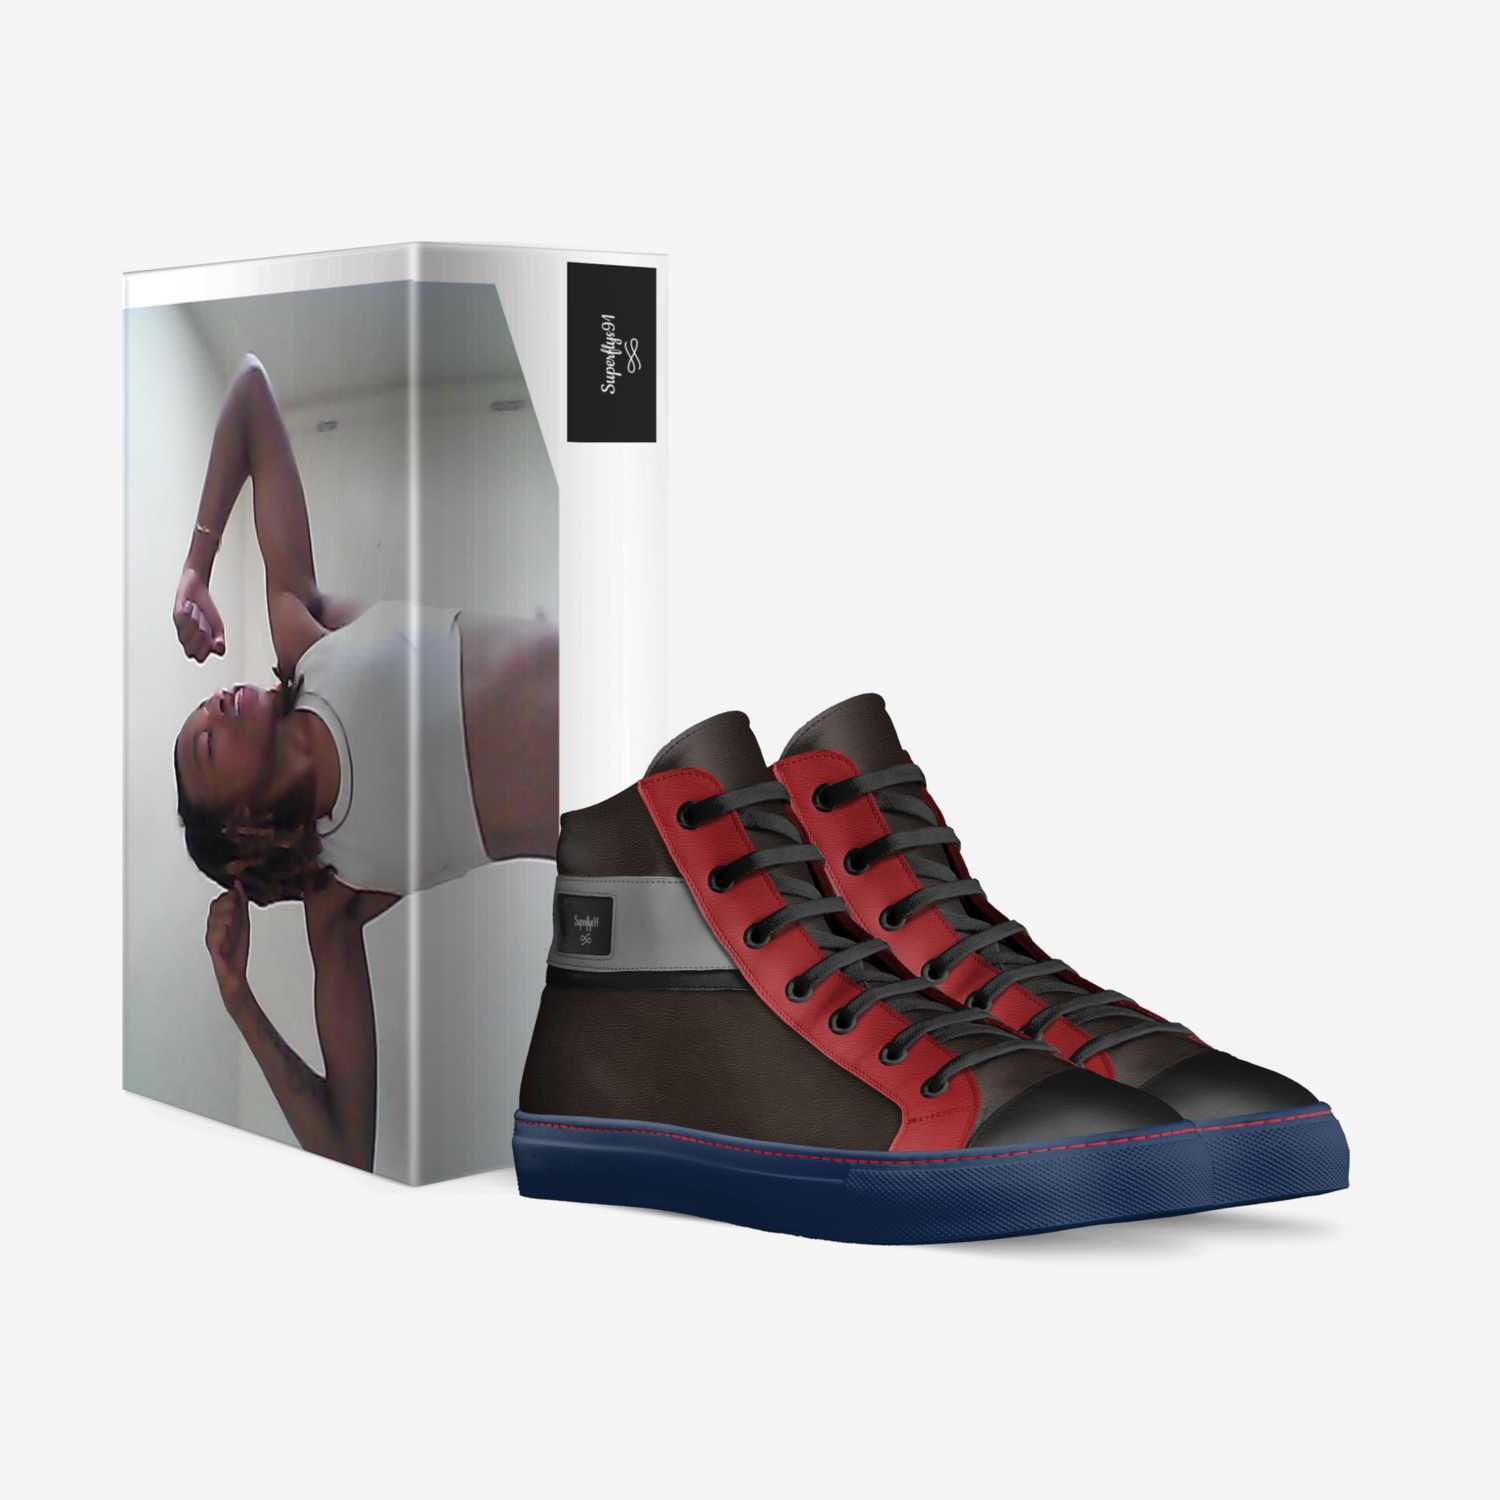 Superflys91 custom made in Italy shoes by Karima Roane | Box view